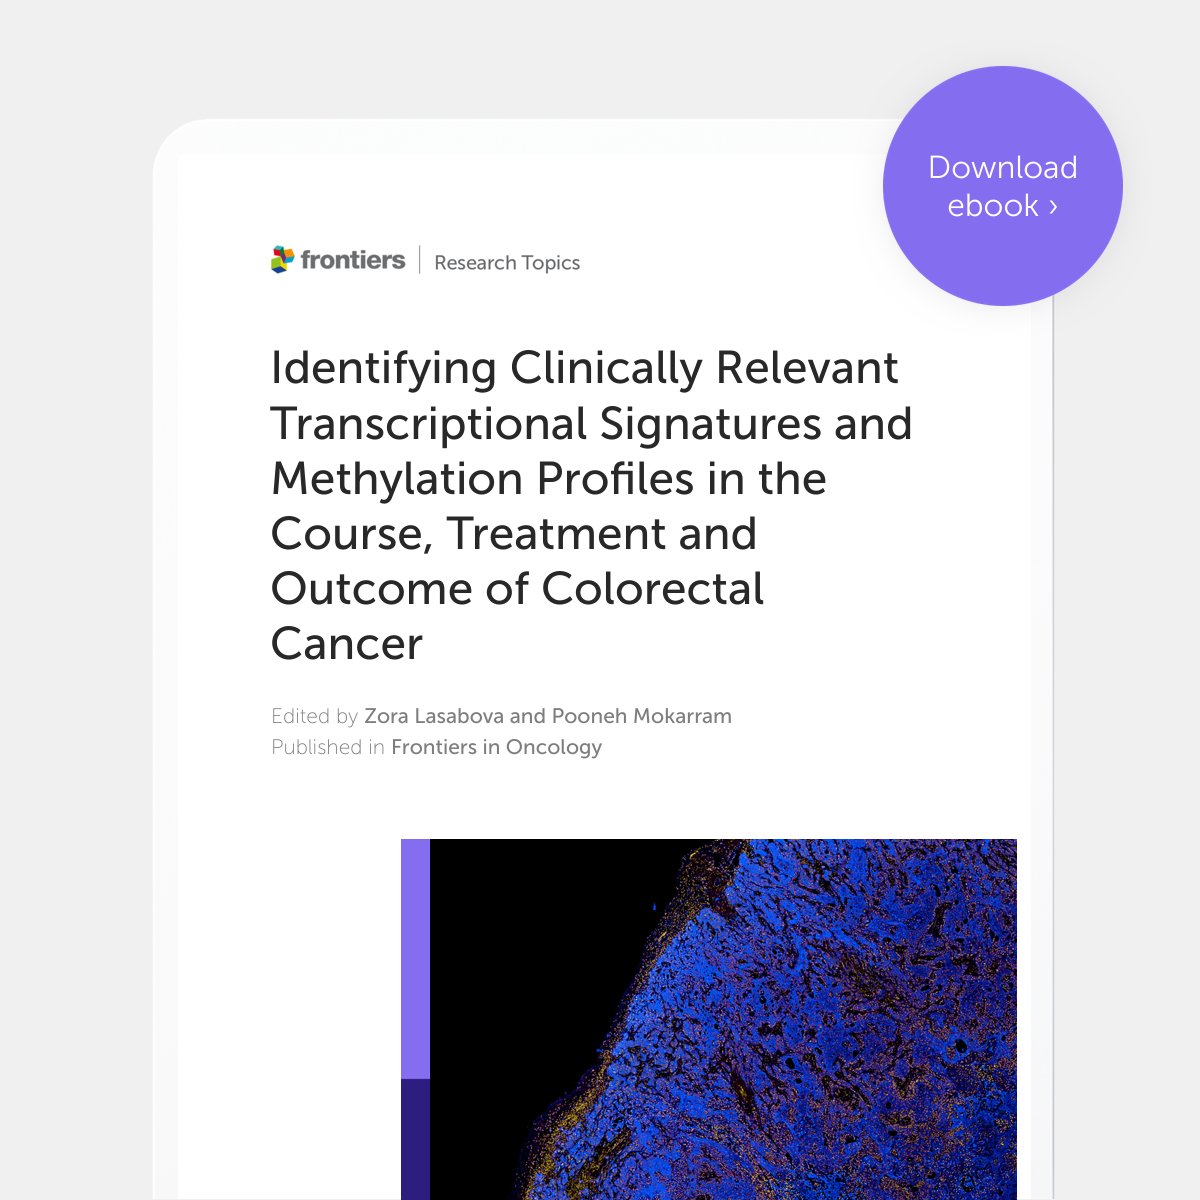 📢 Our new eBook 'Identifying Clinically Relevant Transcriptional Signatures and Methylation Profiles in the Course, Treatment and Outcome of Colorectal Cancer' is now available to download for free! Download your free copy here 👉fro.ntiers.in/RT43725